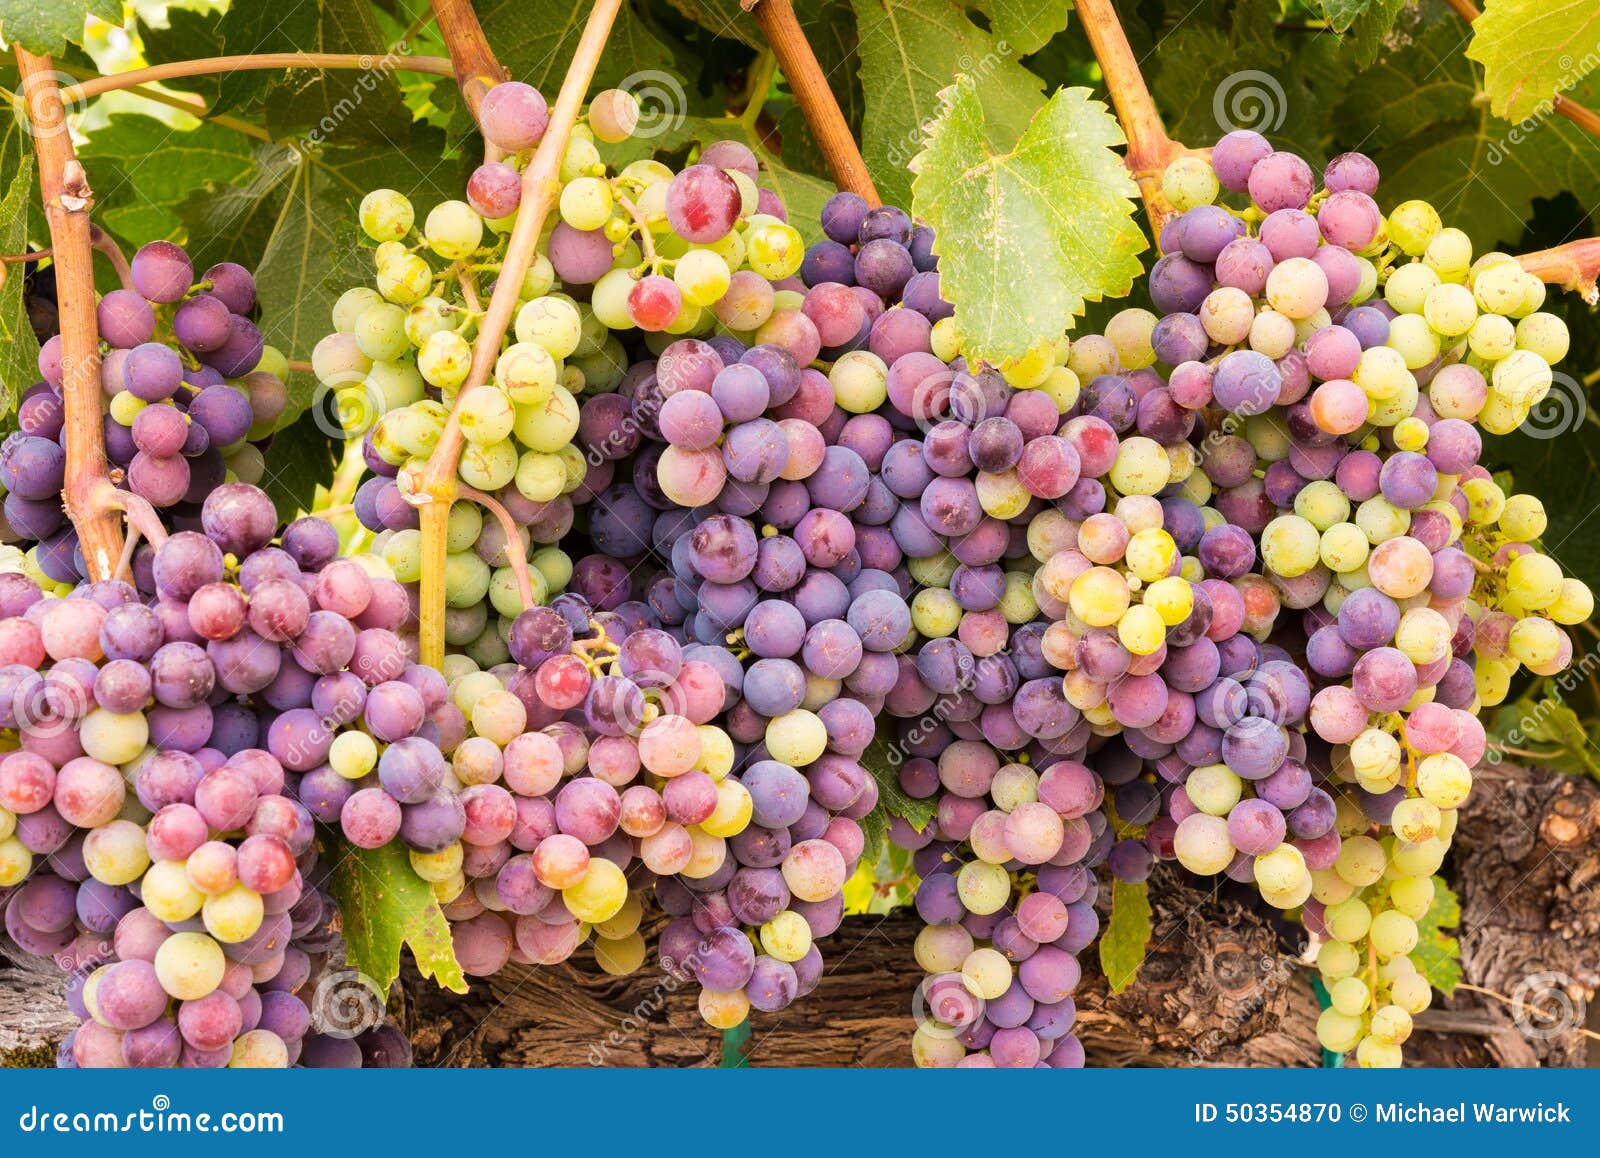 napa valley wine grape clusters ready for harvest